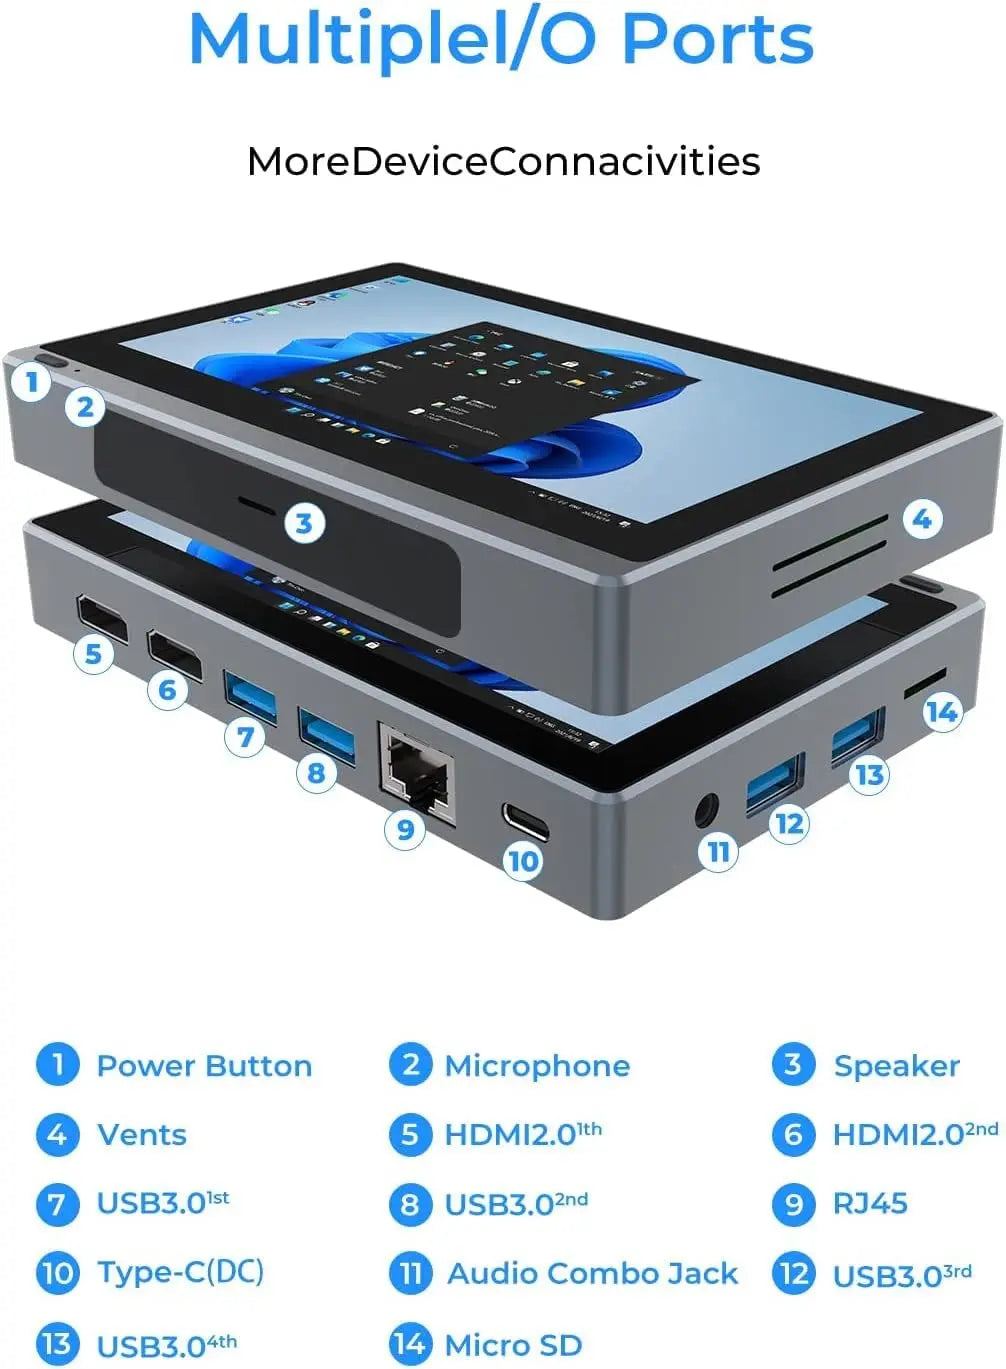 This small computer has built-in 8GB LPDDR4 RAM and 128GB eMMC. It supports DIY expansion of additional storage using M.2_2280 SATA SSD (up to 1TB) and mobile hard disk box via USB3.0 interface. This mini computer comes pre-installed with Win-11 Pro and also supports Linux, Ubuntu